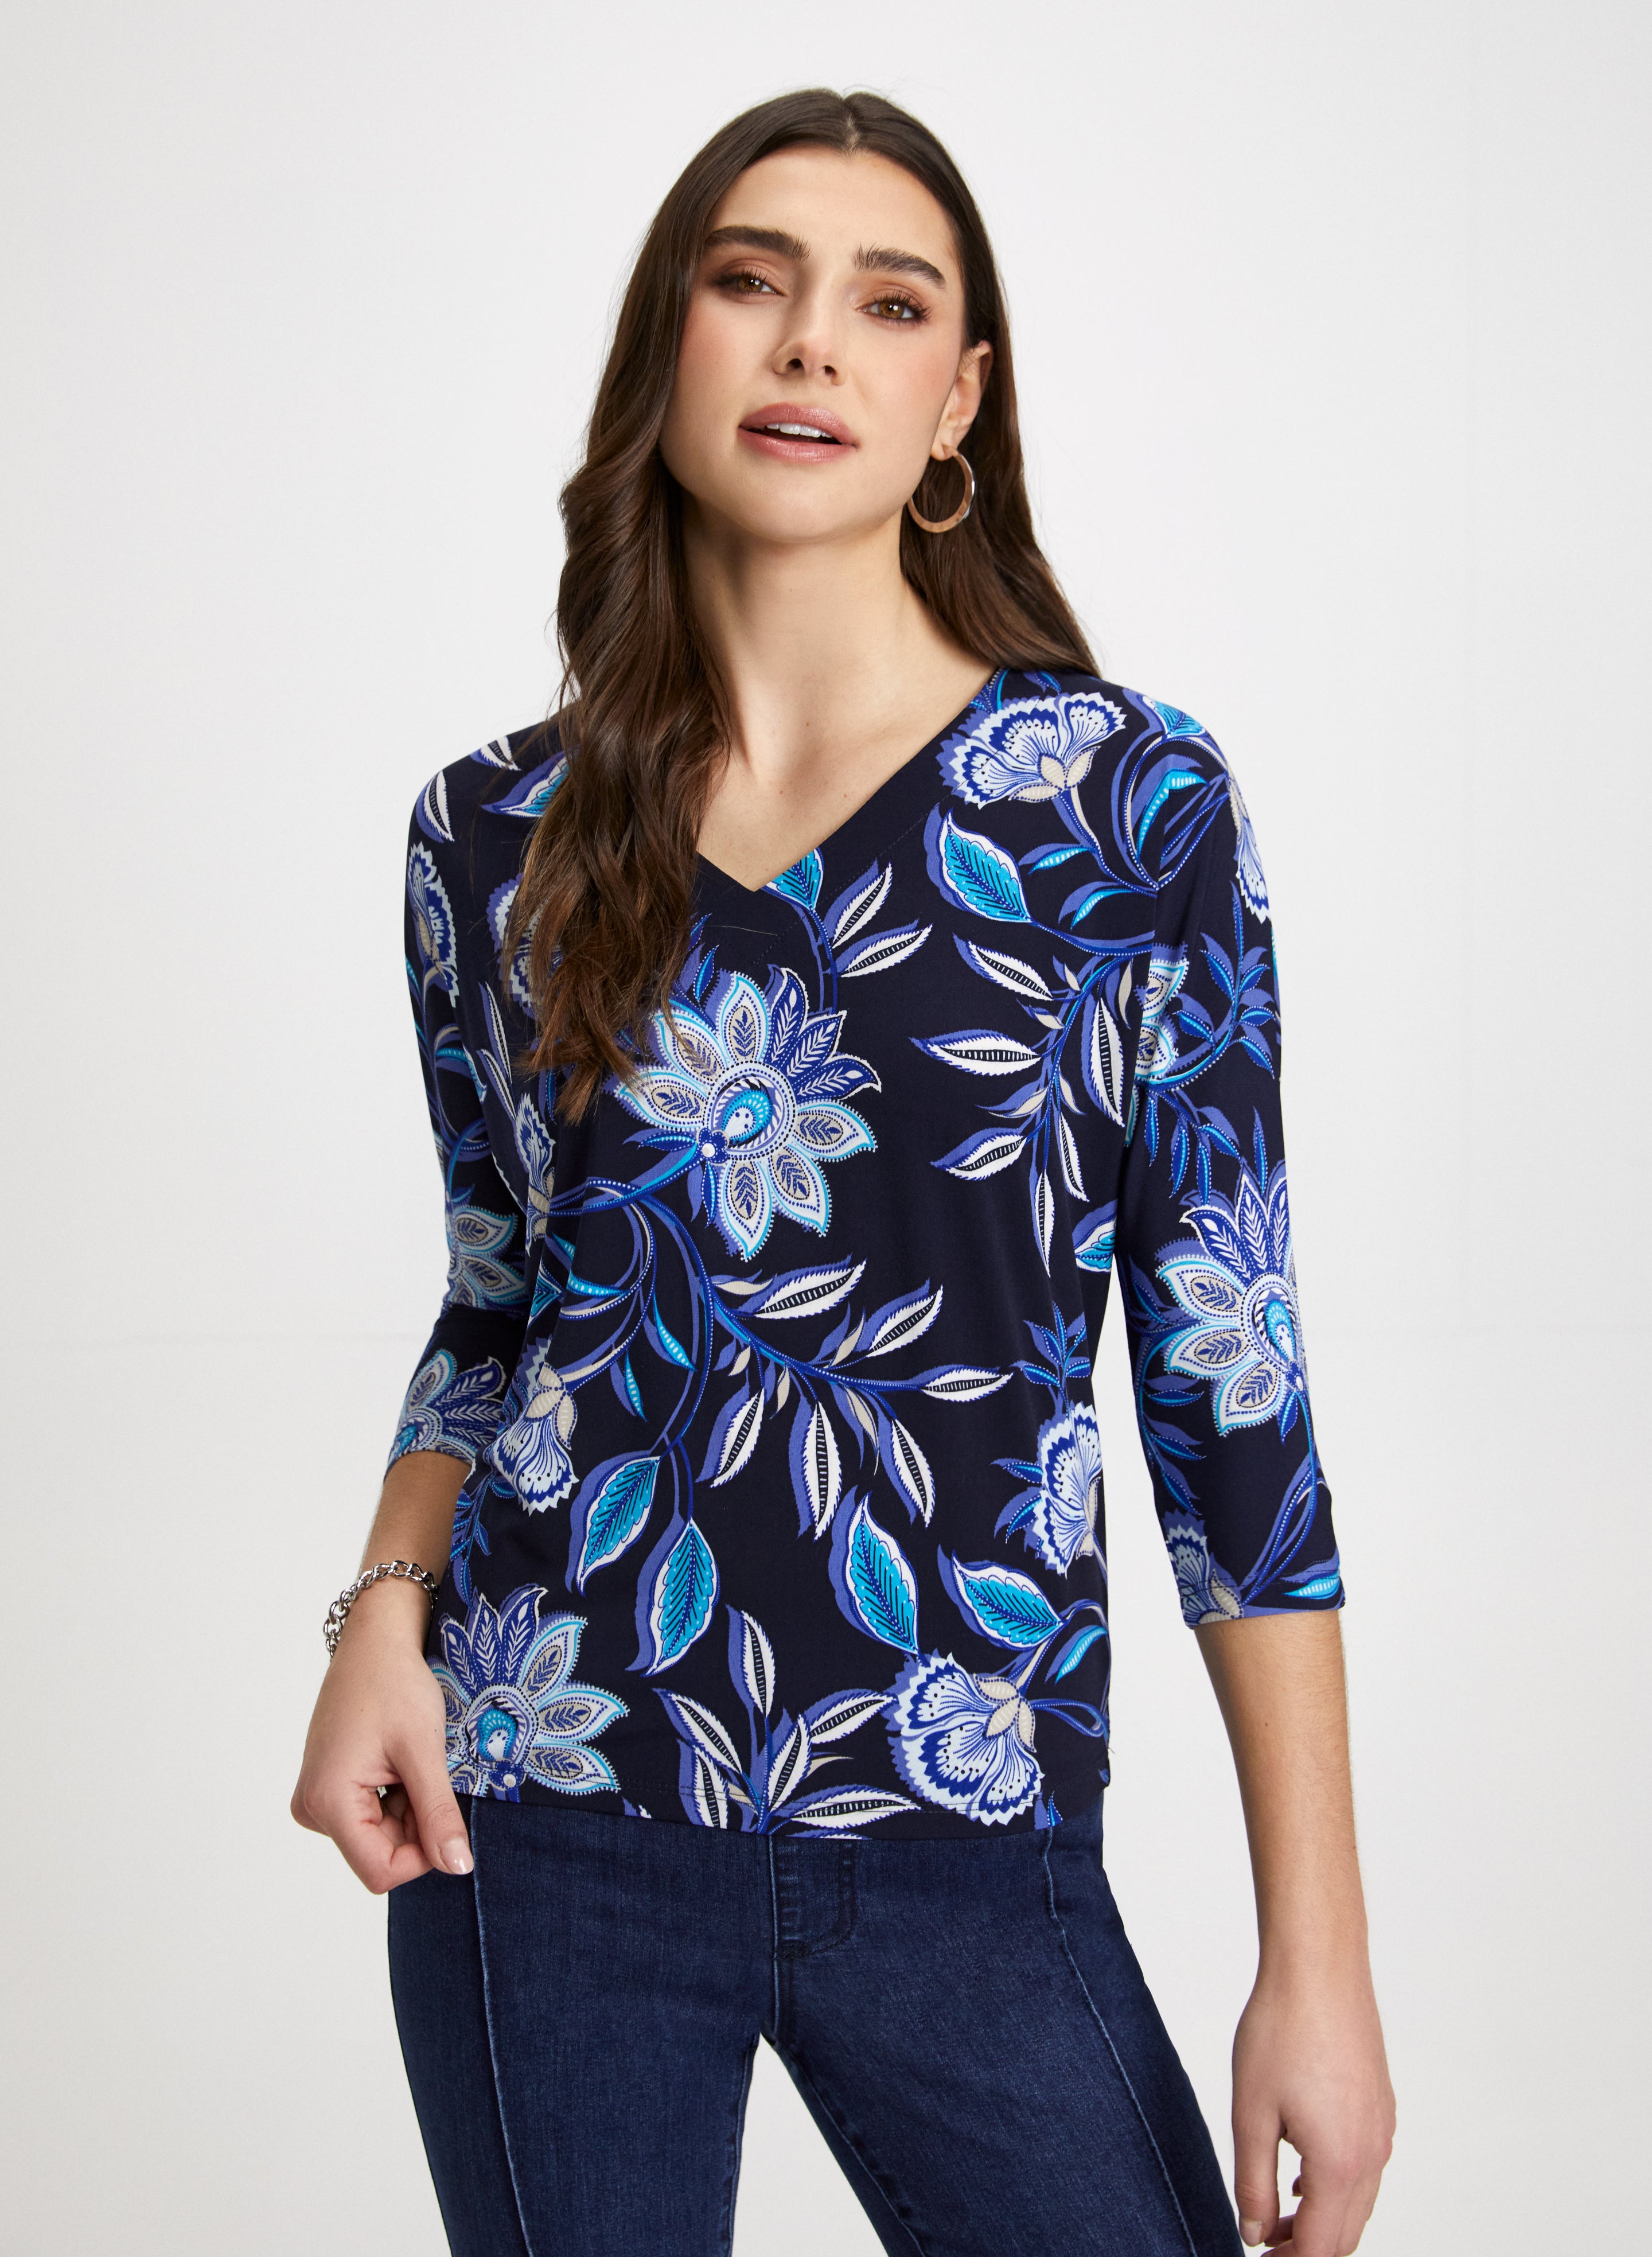 Floral Paisley Top